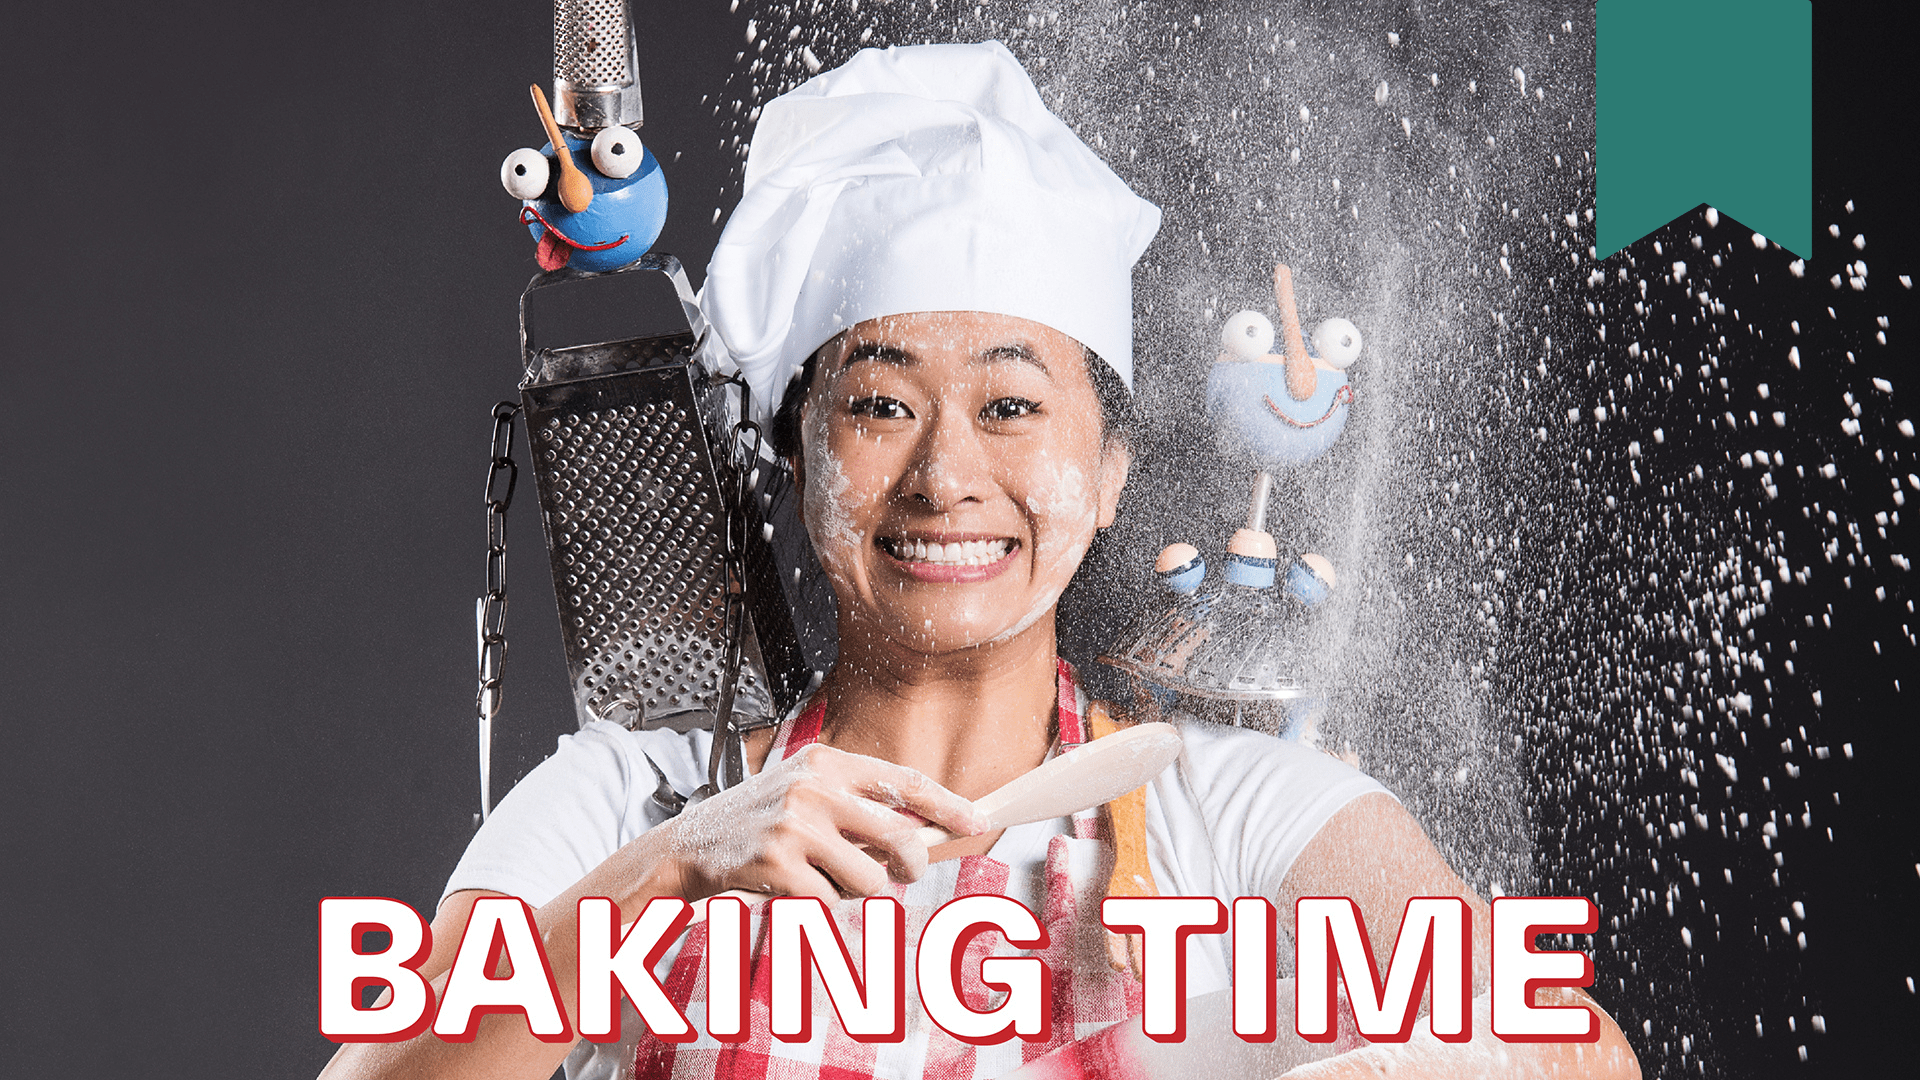 A banner with the title of the show, "Baking Time", featuring the image of Baker Bap covered in flour and the whimsical puppets, Greta and Colanderella.